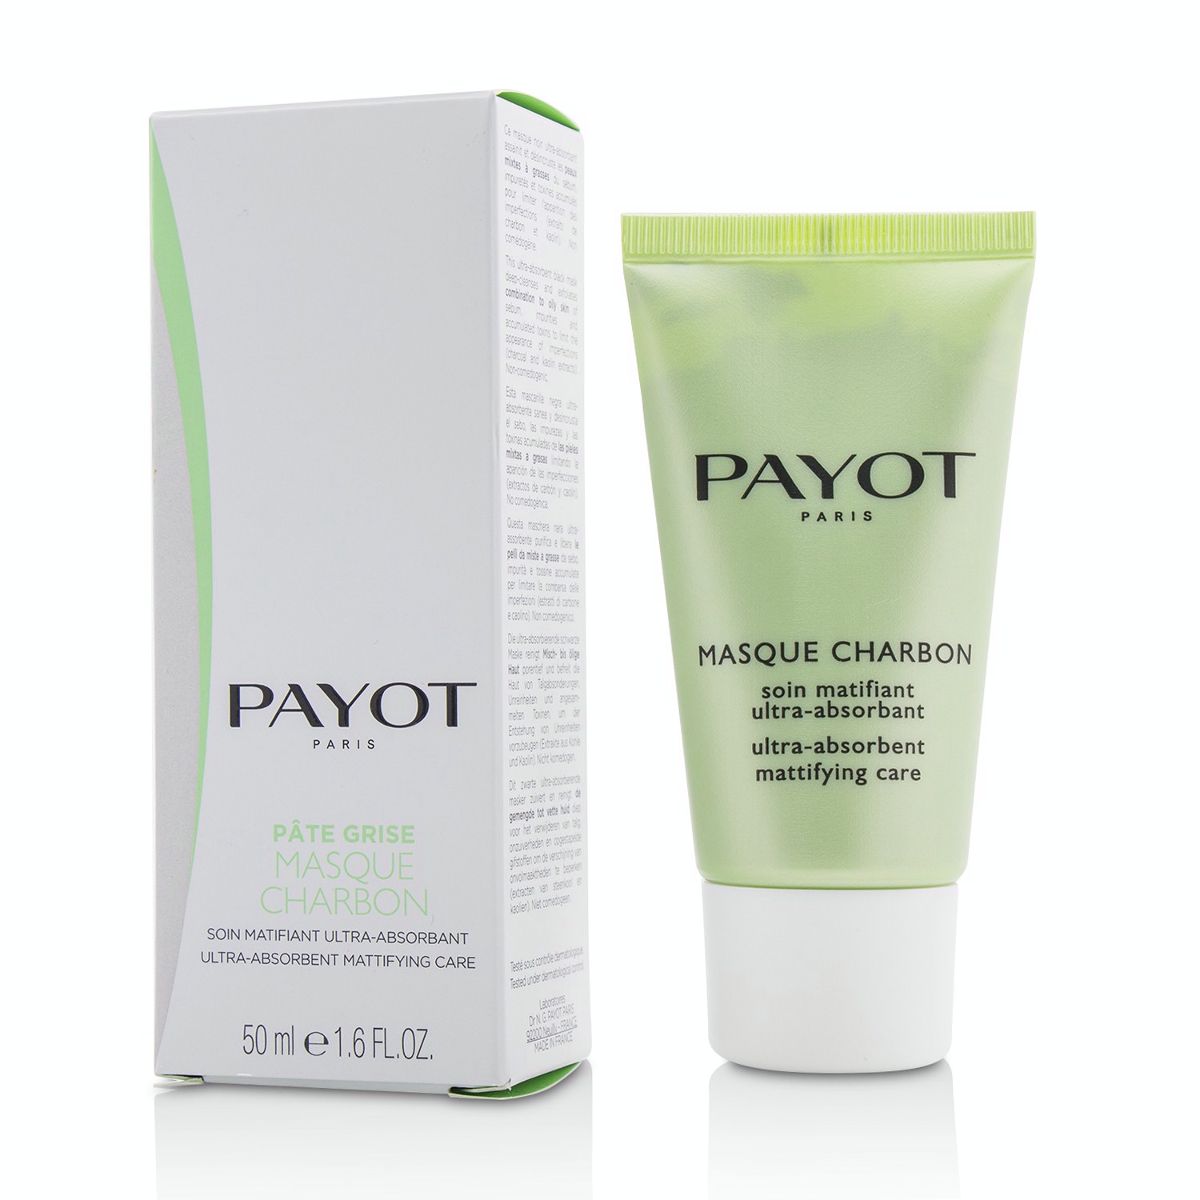 Pate Grise Masque Charbon - Ultra-Absorbent Mattifying Care Payot Image